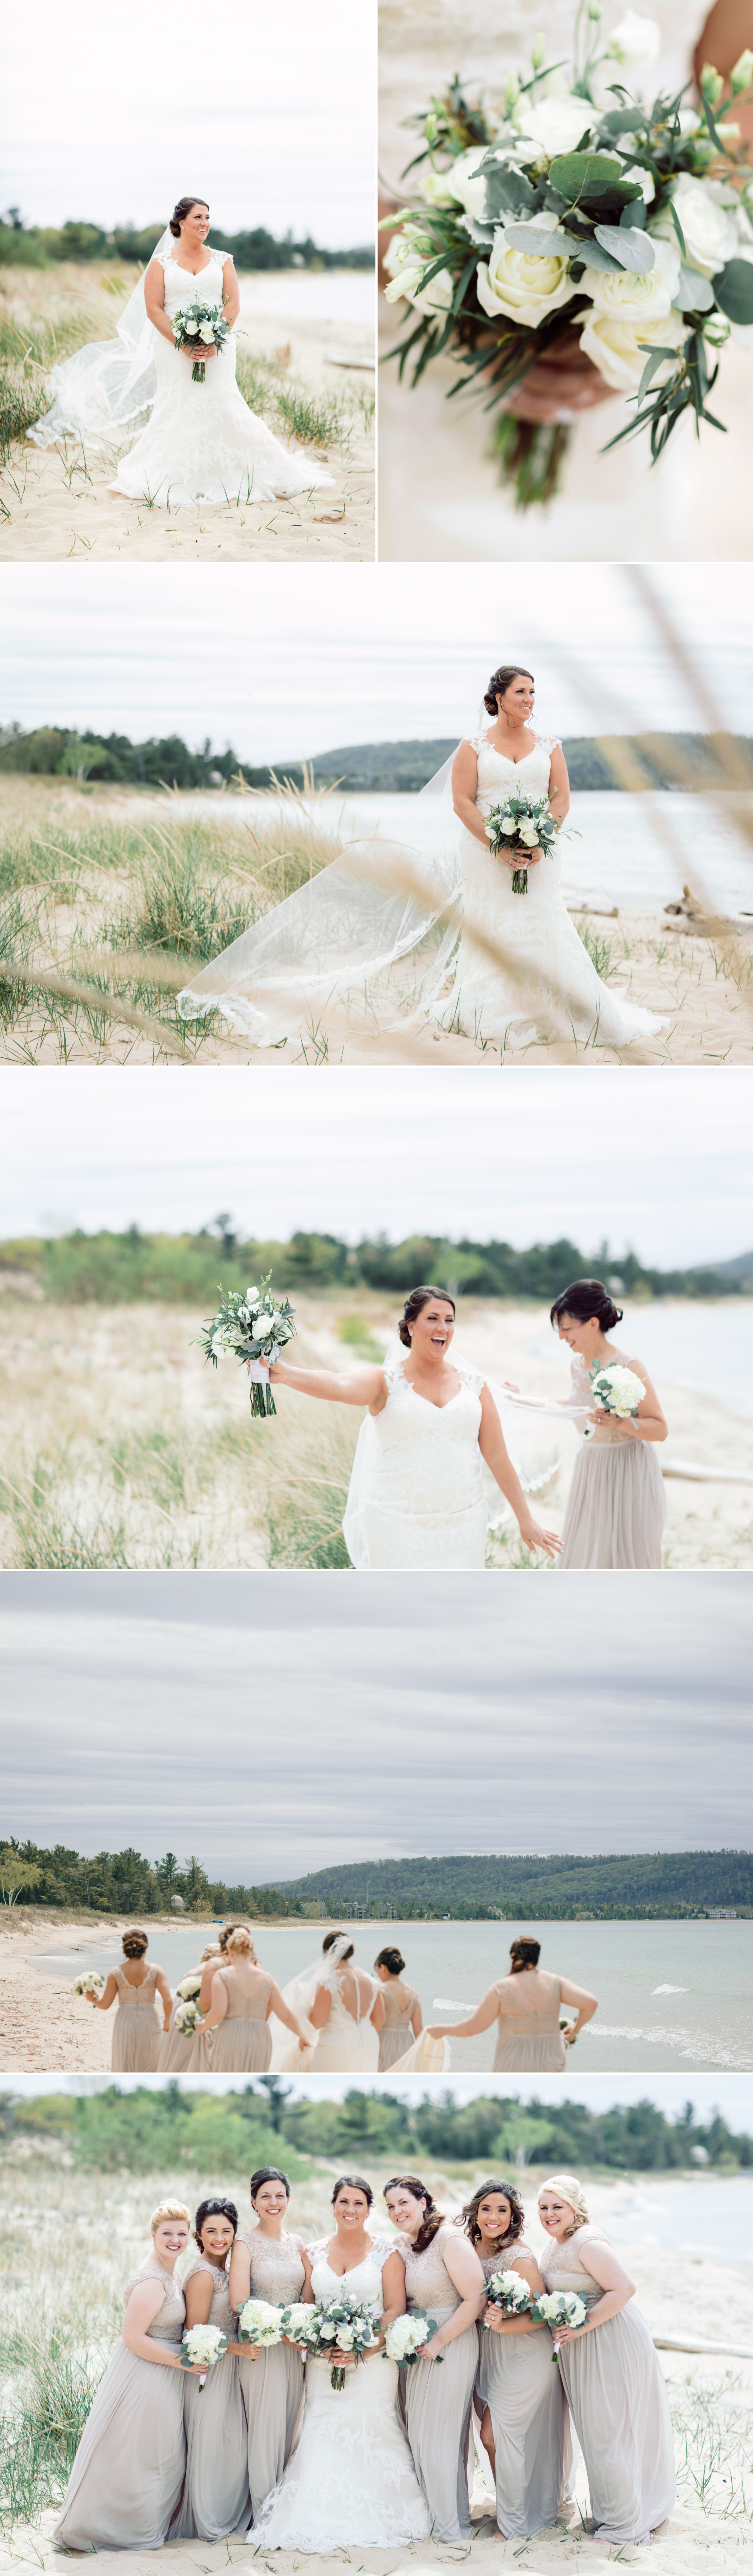 bride and bridesmaids on the beach at the Homestead Resort in Glen Arbor Michigan